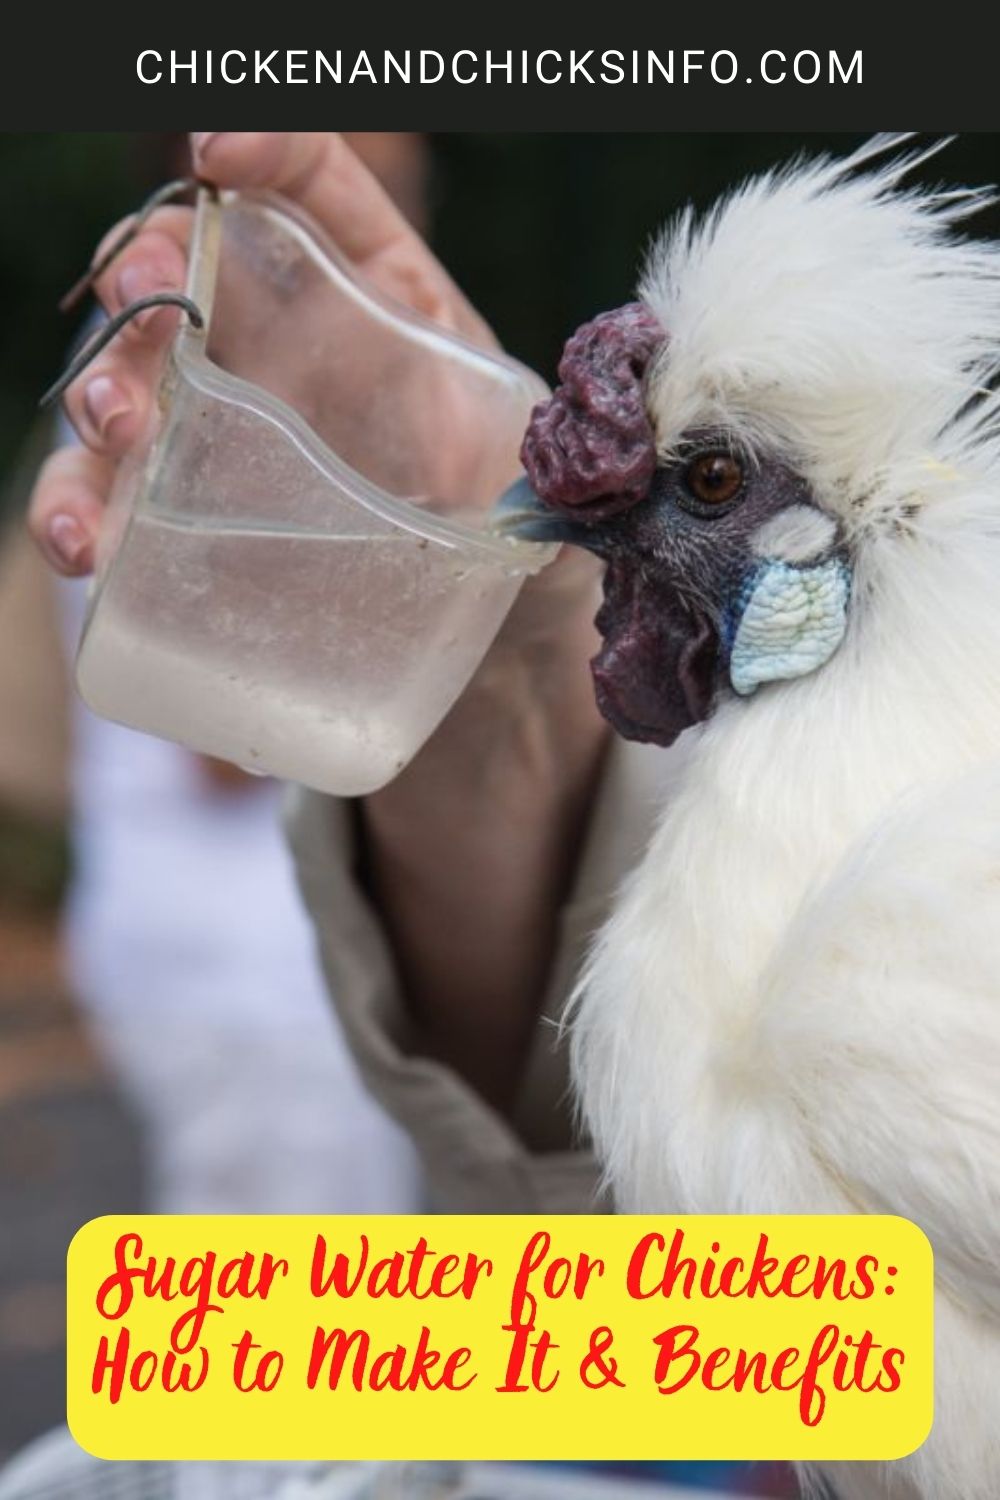 Sugar Water for Chickens: How to Make It & Benefits poster.
